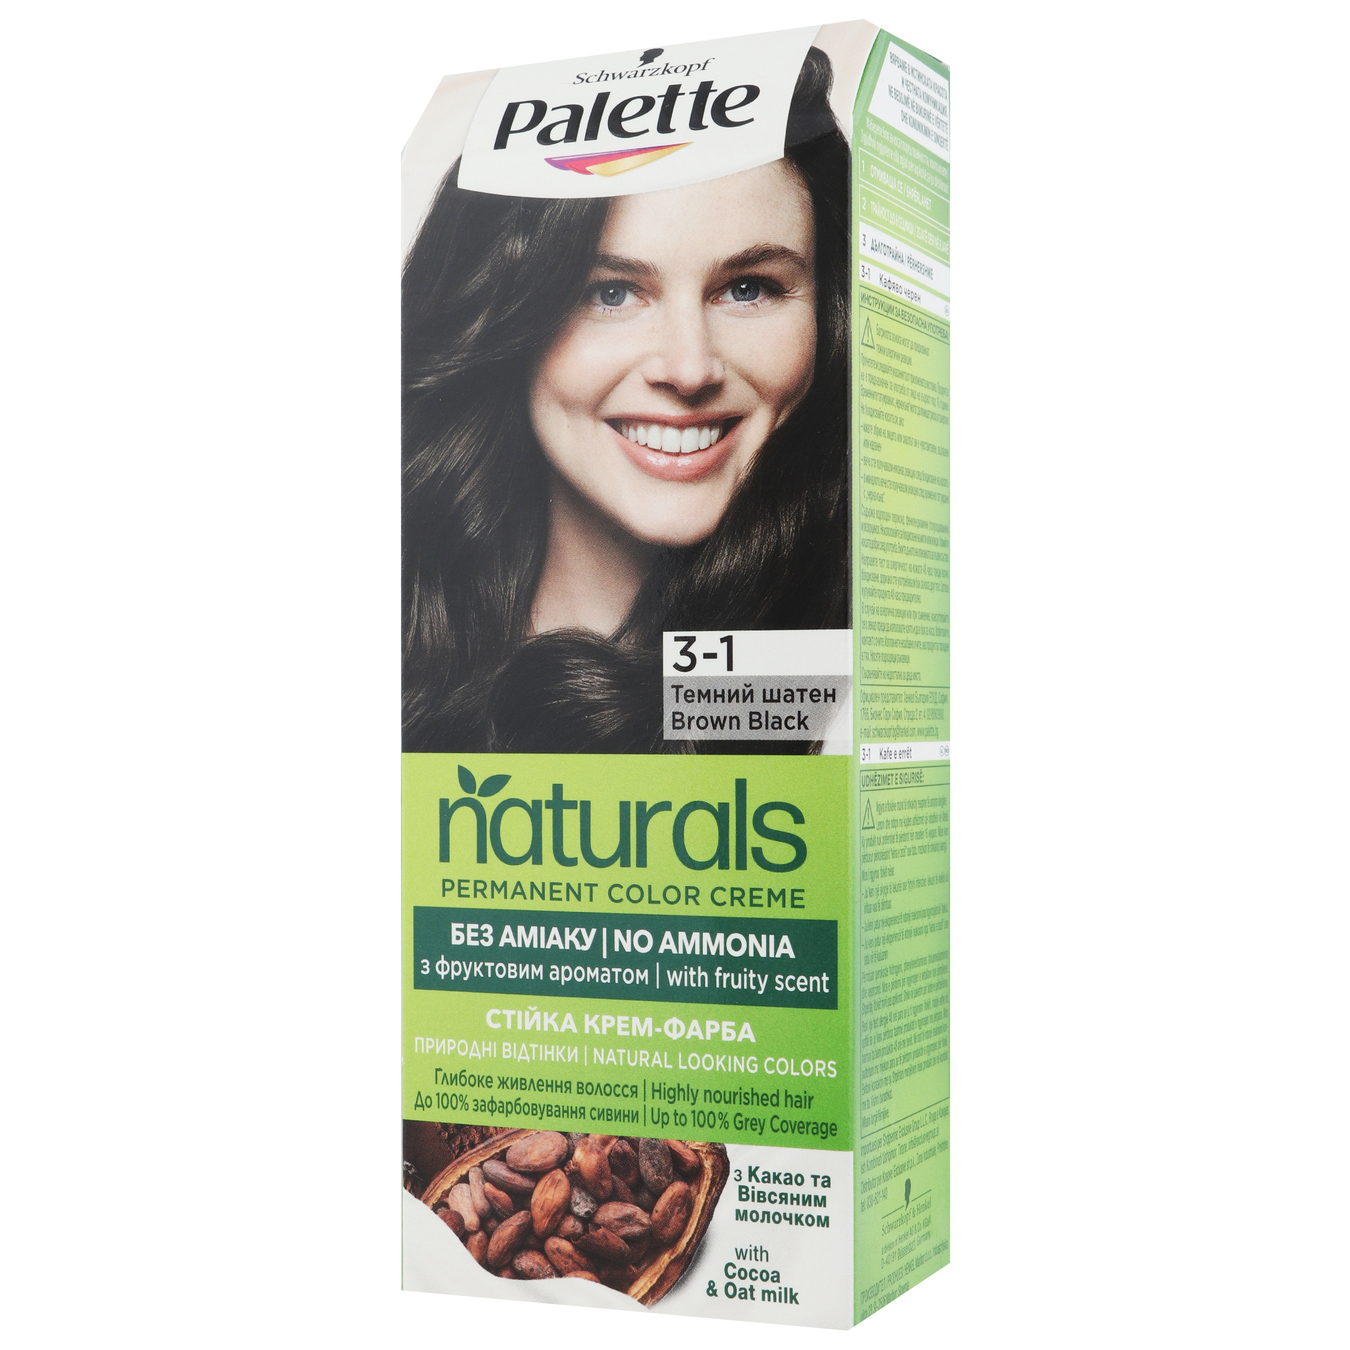 Cream-paint Palette Naturals 3-1 Dark brown without ammonia permanent for hair 110ml 4